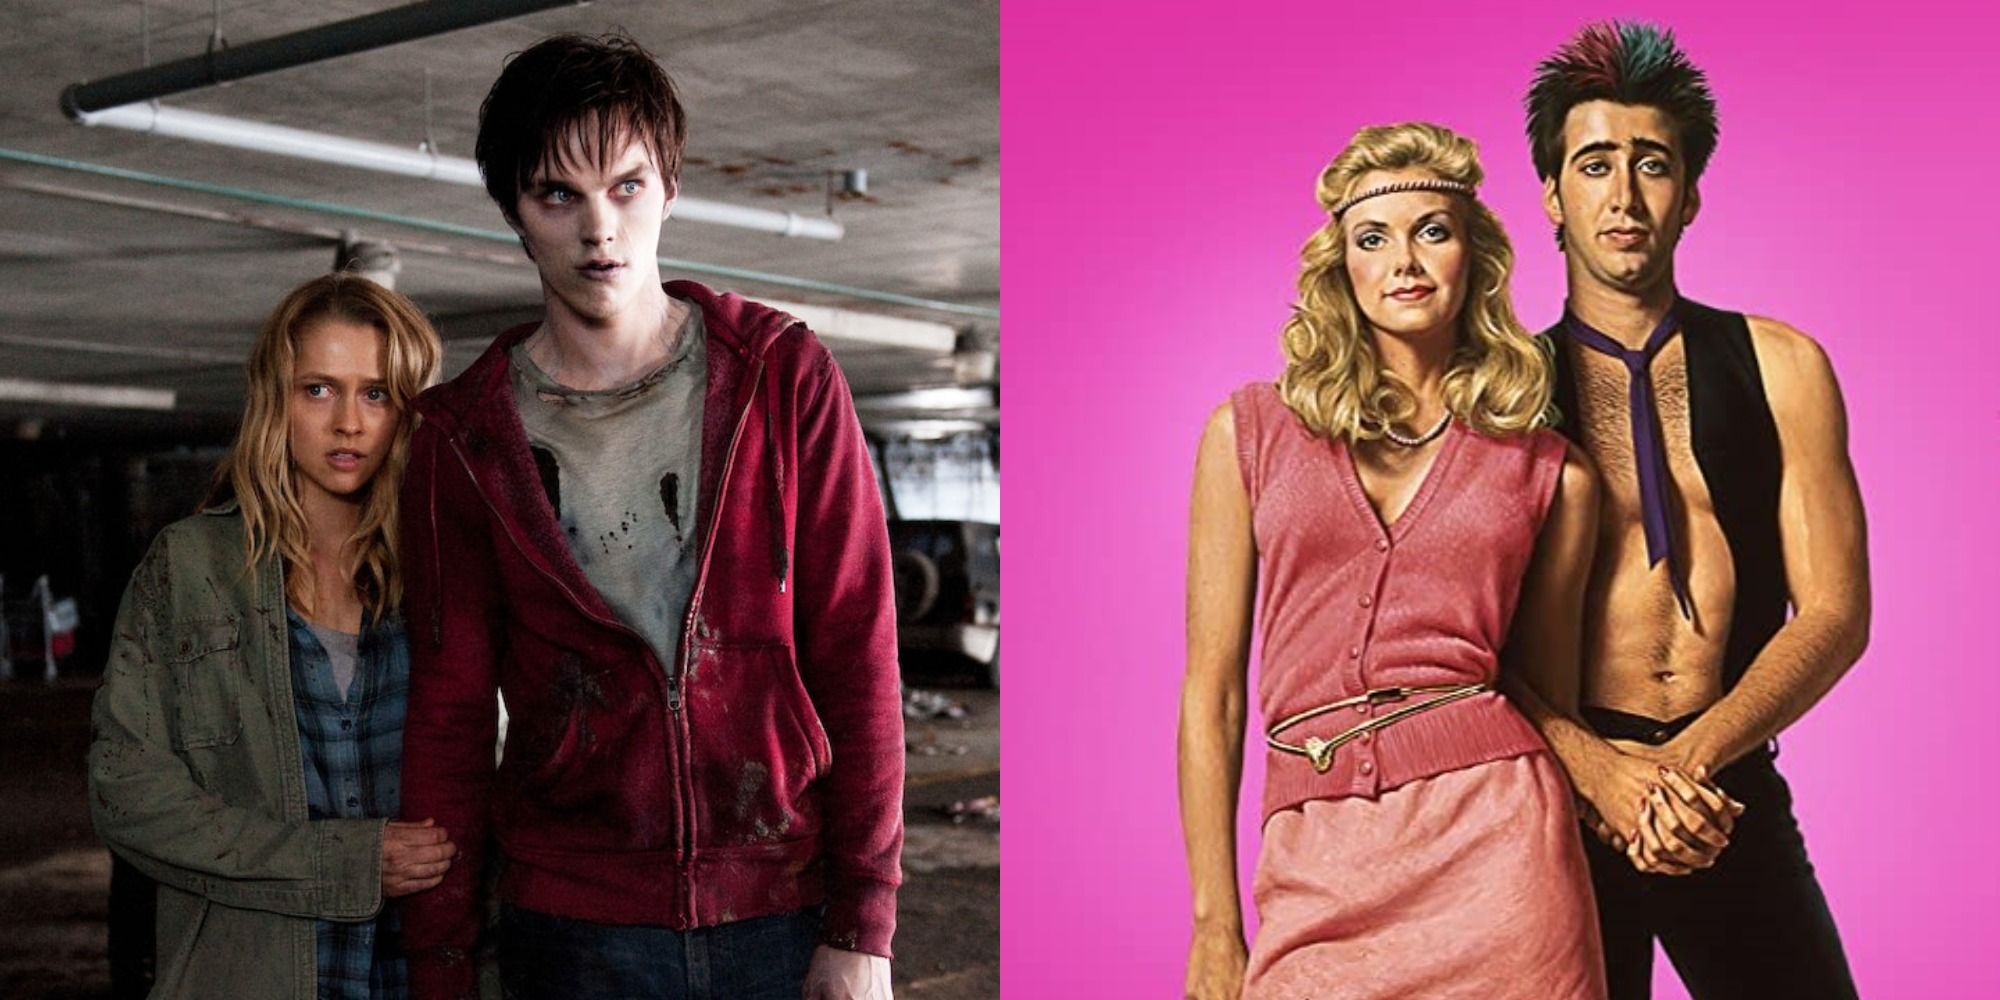 Split image showing the couples from Warm Bodies and Valley Girl